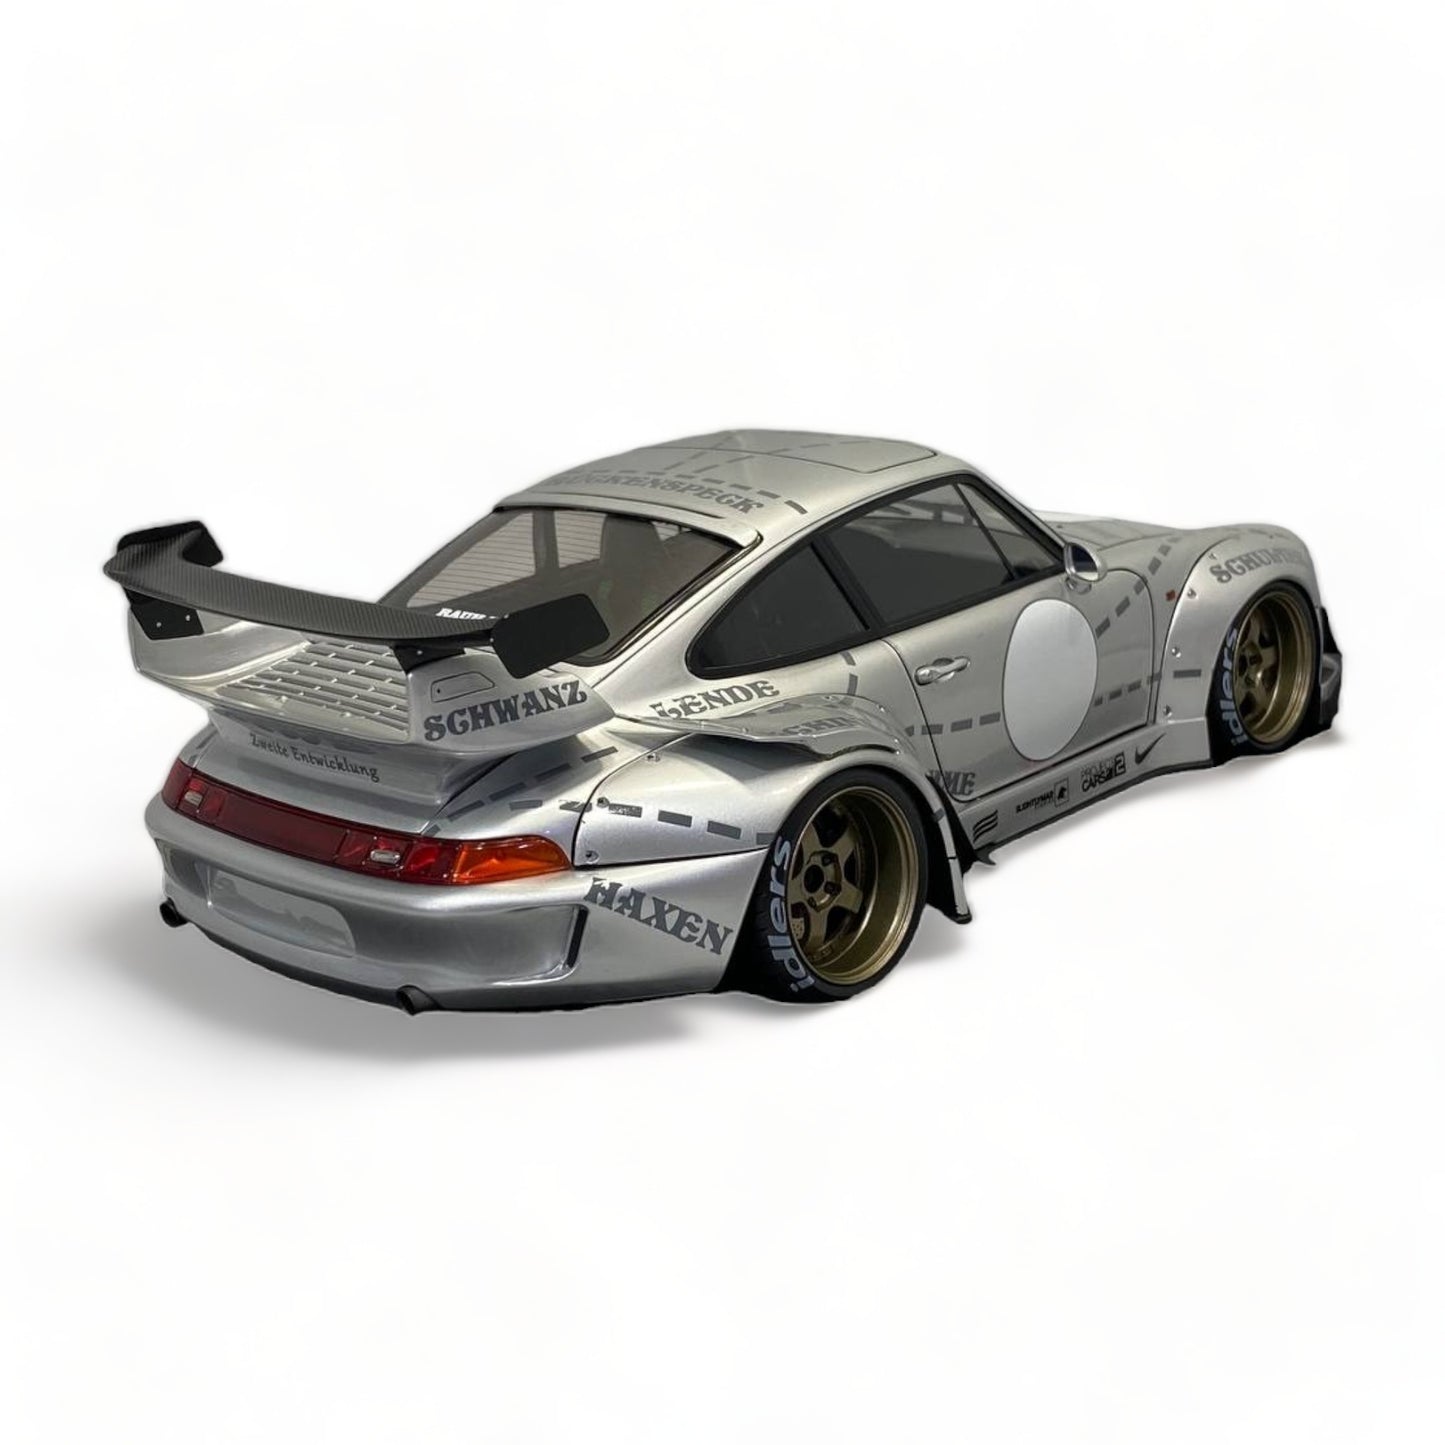 1/18 Diecast  Toyota TOYOTA-SUPRA MK4 By ignition-model Micoature Car